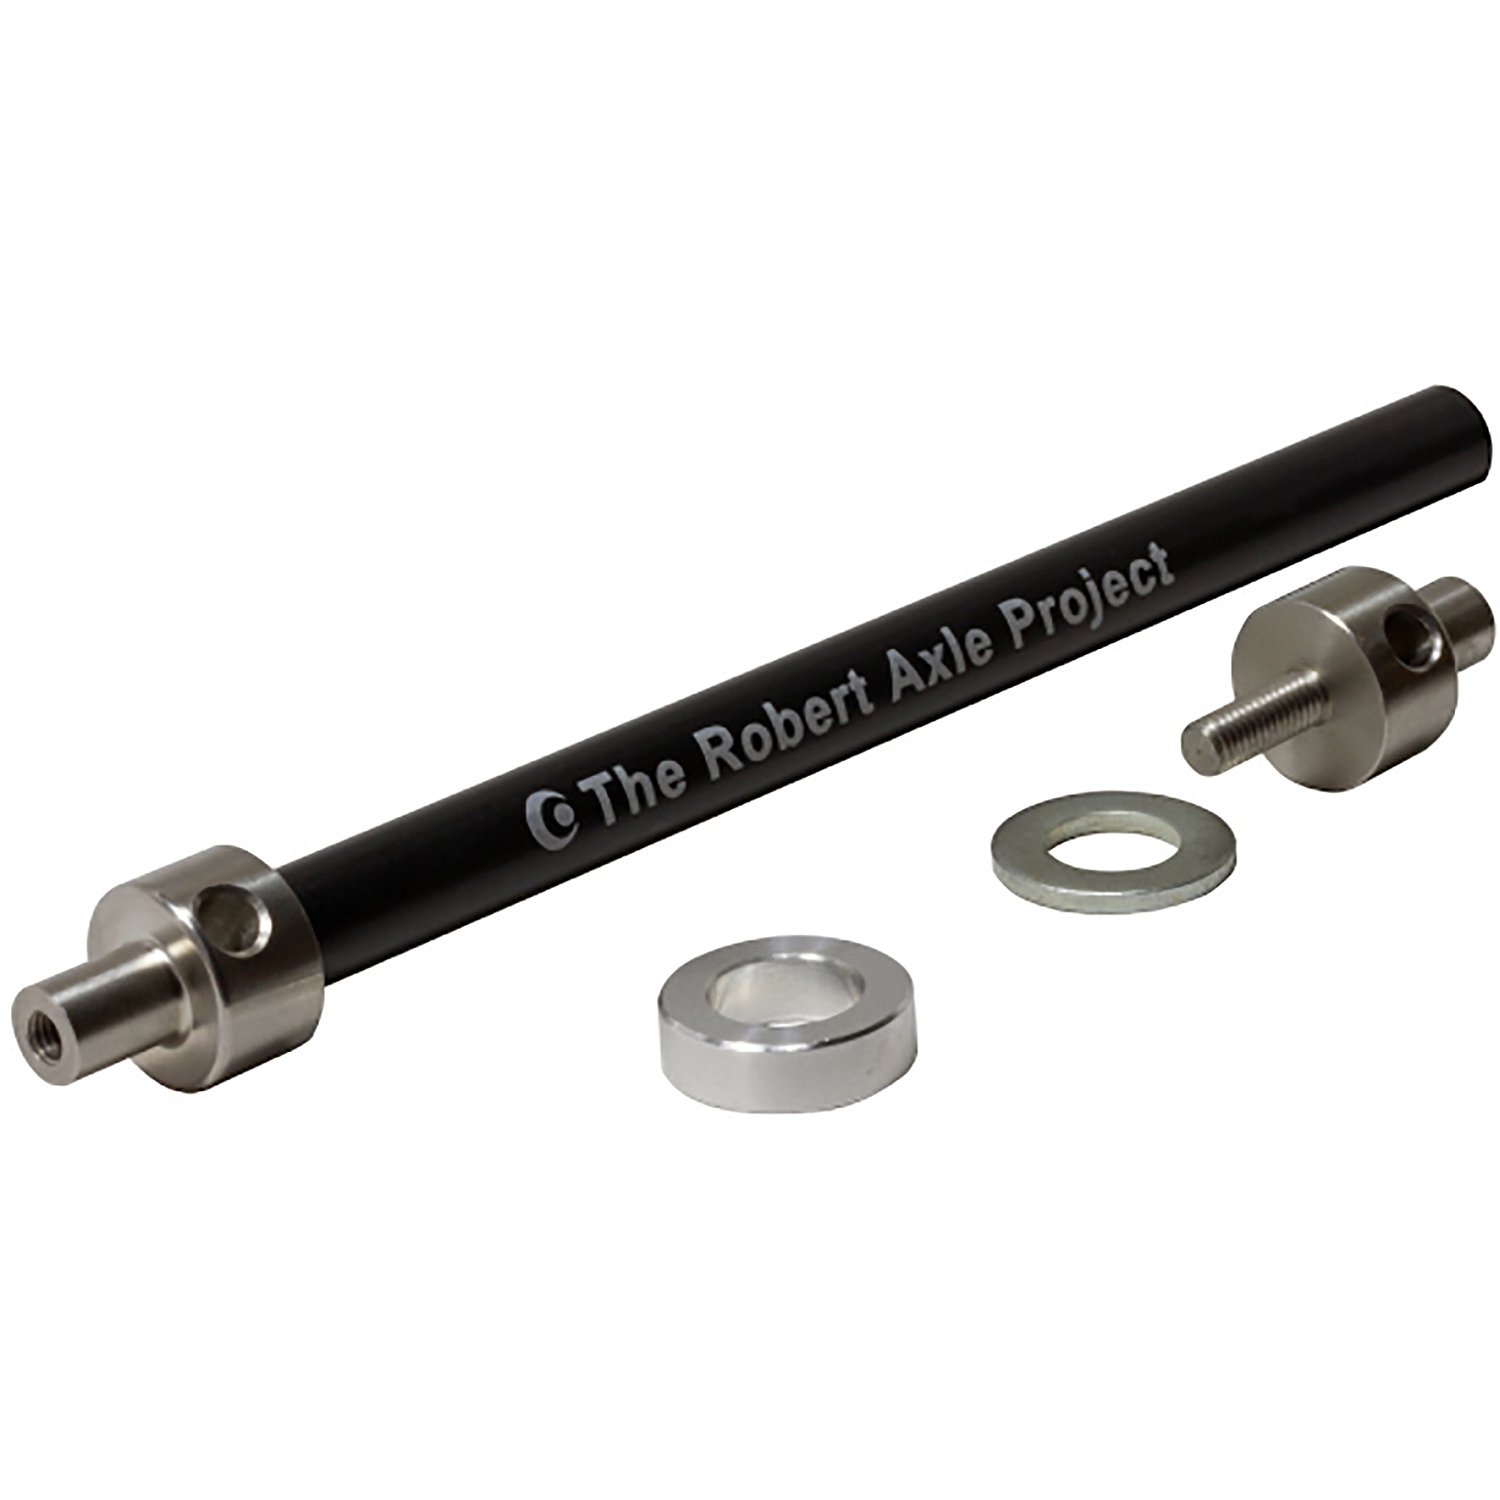 Picture of The Robert Axle Project - Thru Axle for BOB Trailer - 12x142mm - M12x1.75 - BOB121